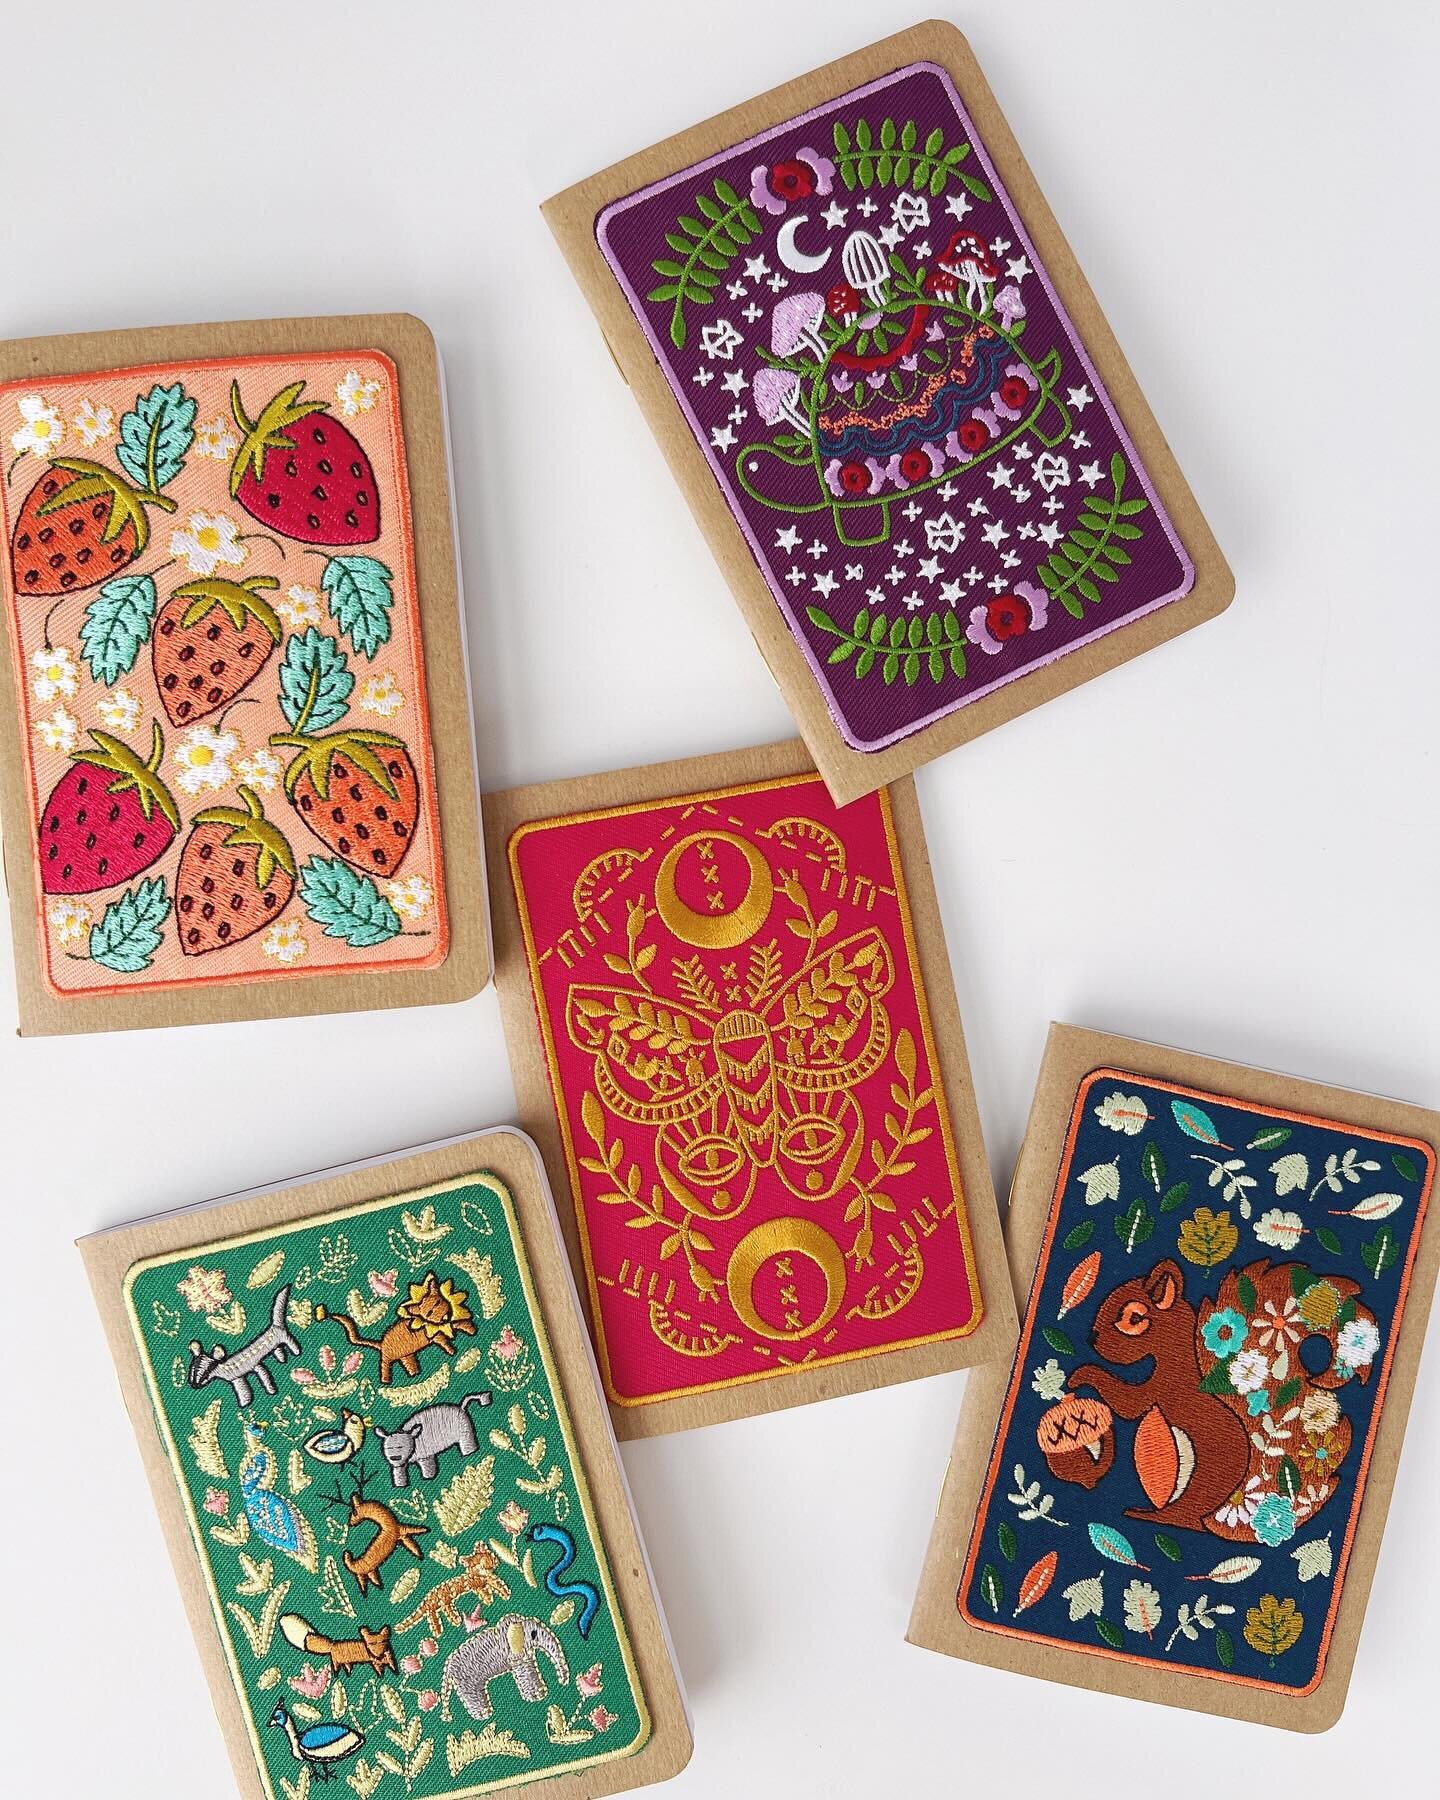 More stitchy goodness coming your way! These cute little pocket notebooks are perfect for on the go notes. They have blank pages so you can even use them as little sketchbooks.  #notebooklove #sketchbook #pocketnotebook #embroiderylove #embroidery